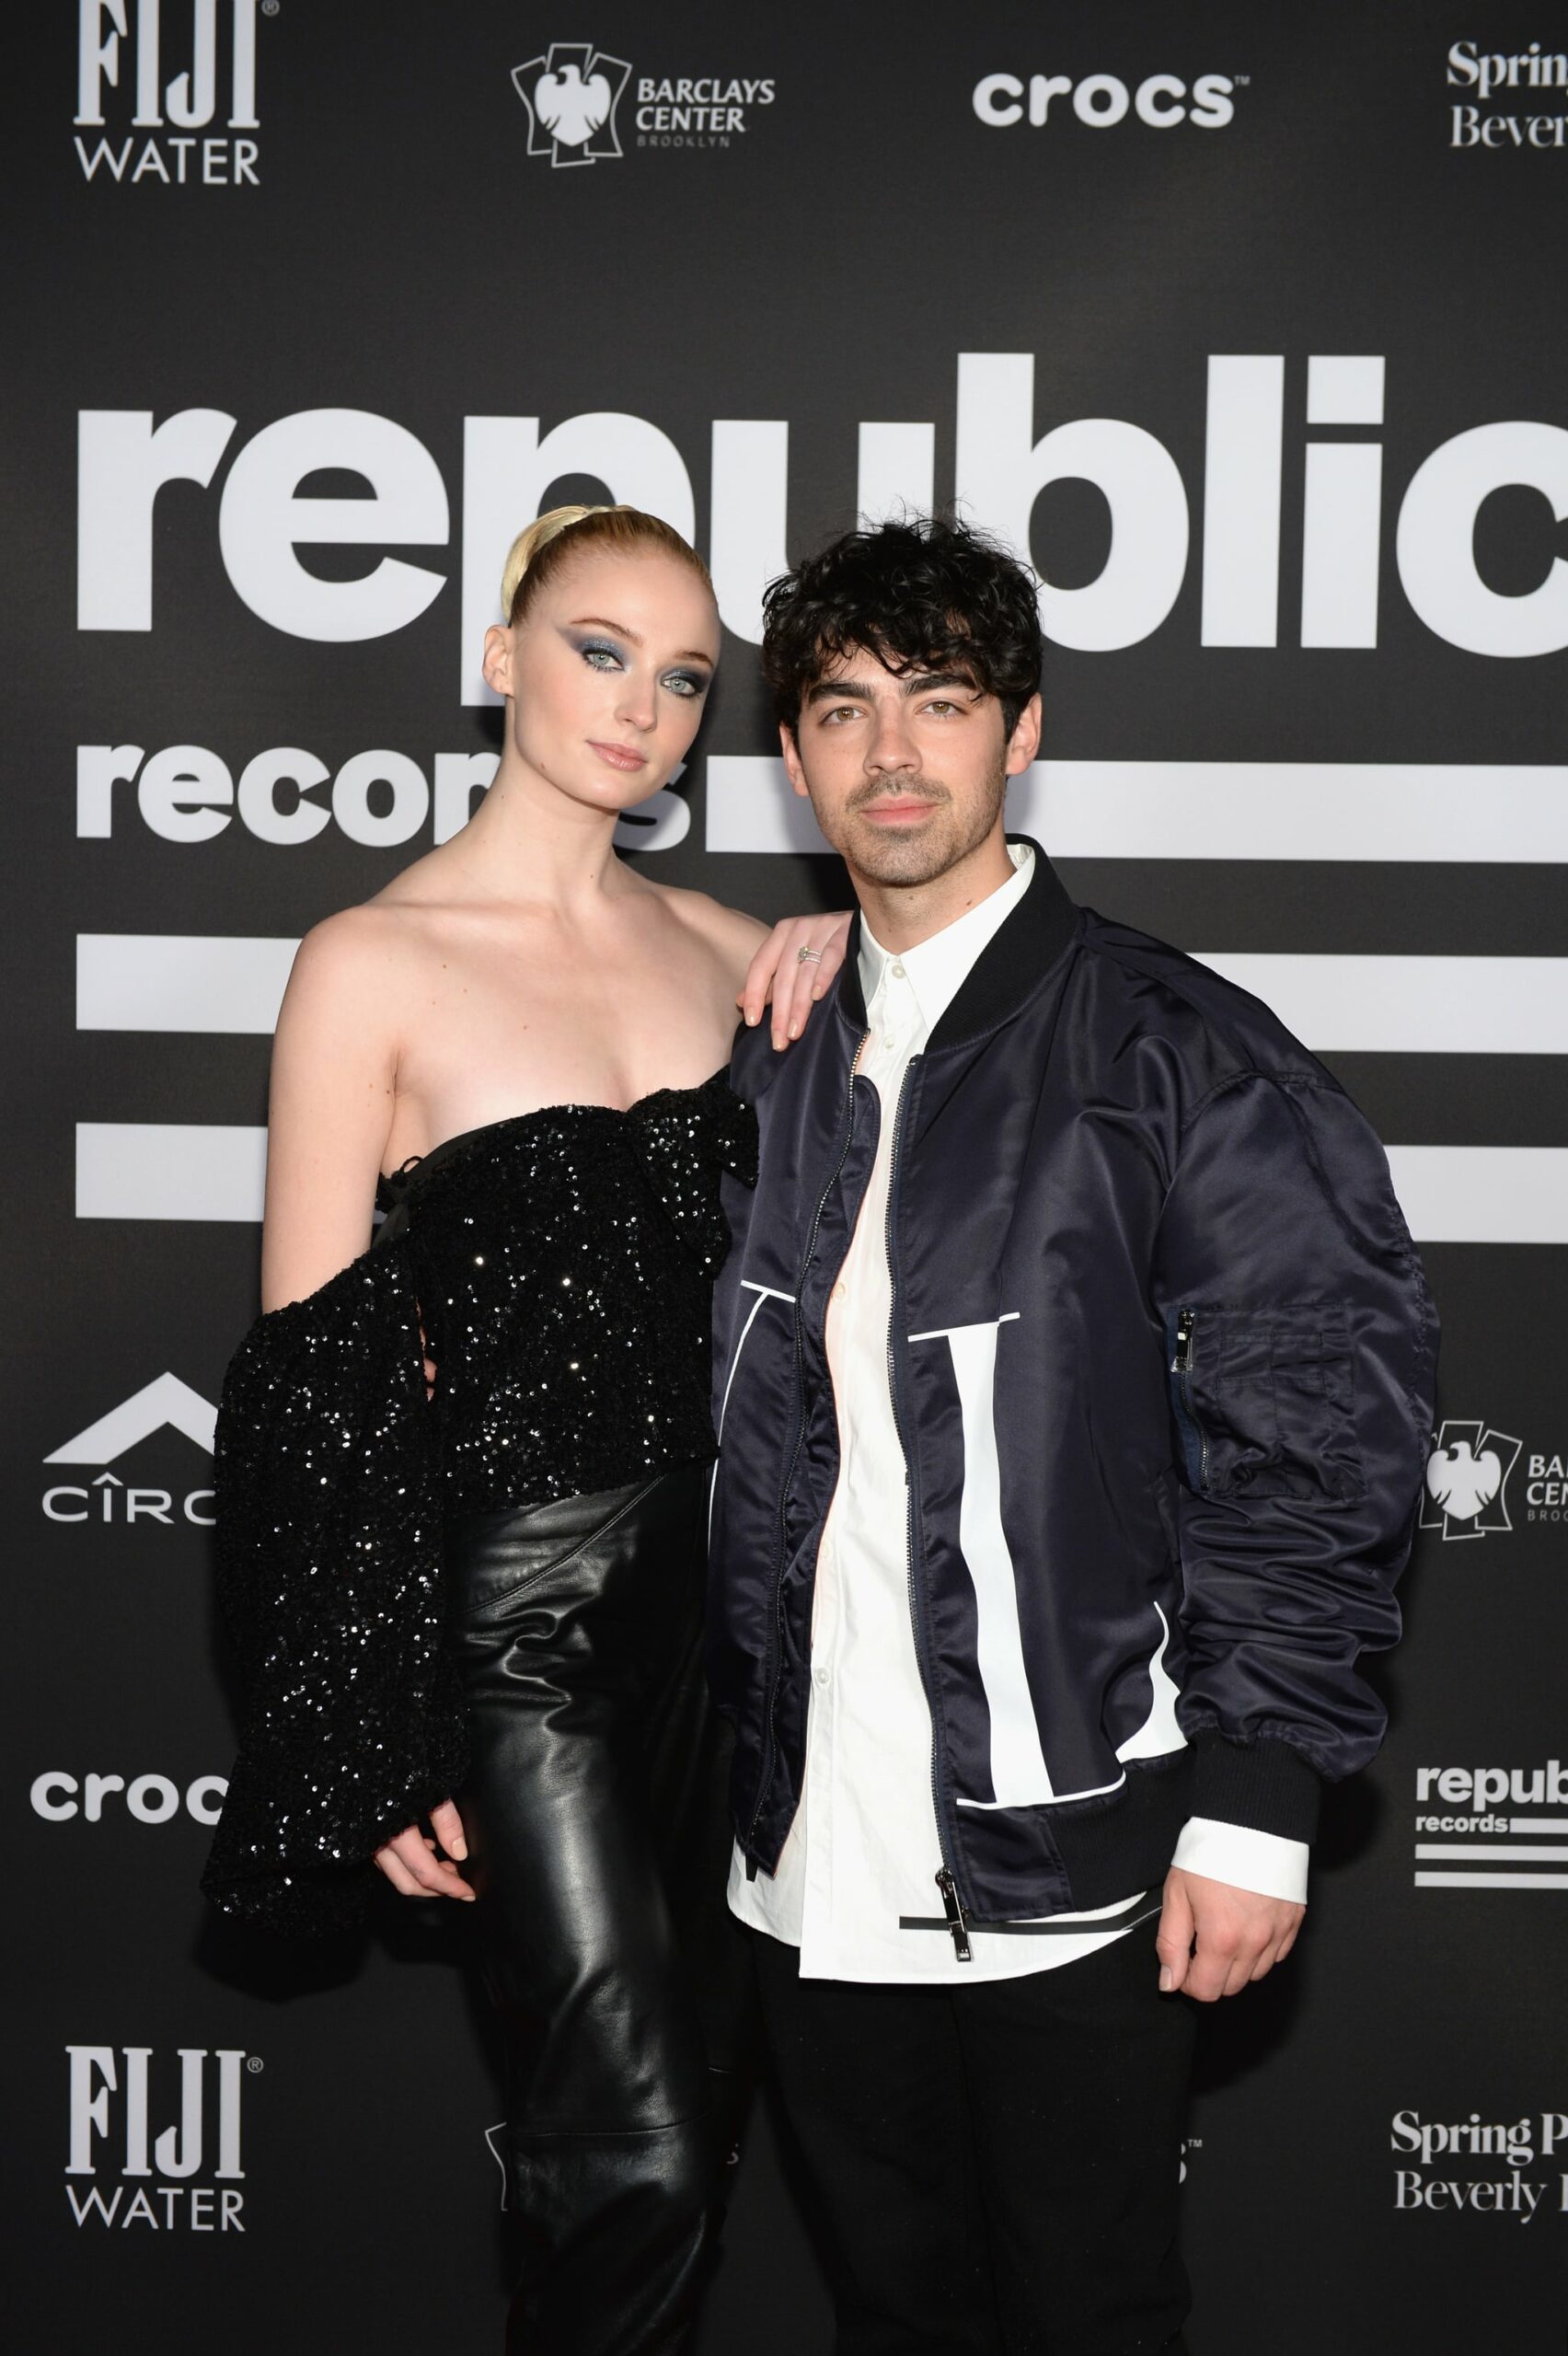 BEVERLY HILLS, CA - FEBRUARY 10:  Sophie Turner (L) and Joe Jonas attend Republic Records Grammy after party at Spring Place Beverly Hills on February 10, 2019 in Beverly Hills, California.  (Photo by Andrew Toth/Getty Images for Republic Records)